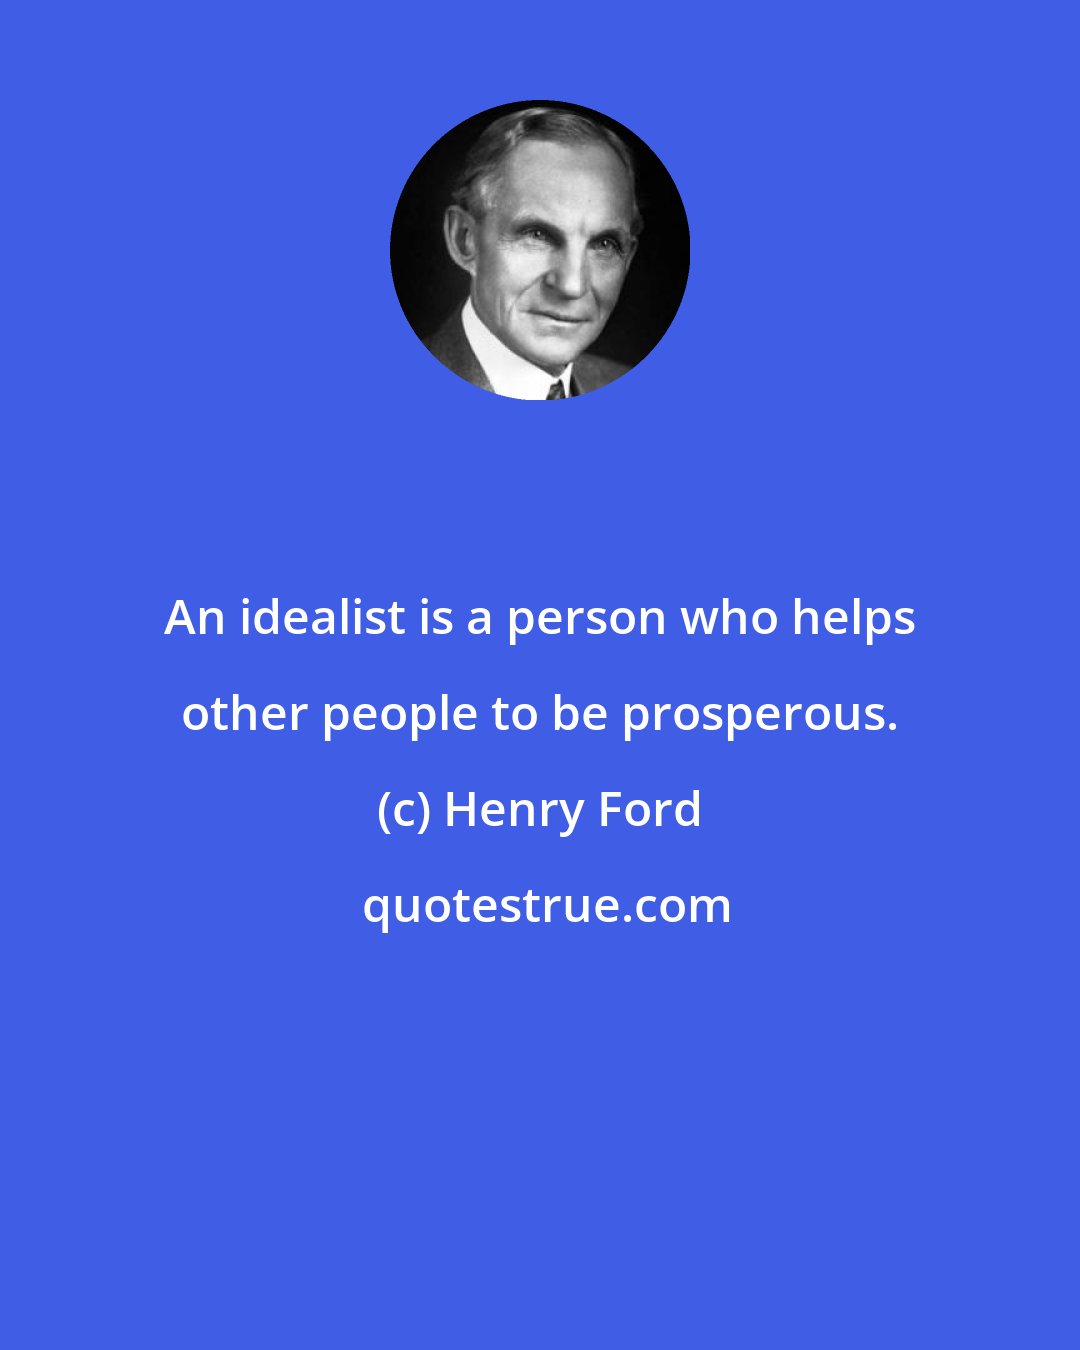 Henry Ford: An idealist is a person who helps other people to be prosperous.